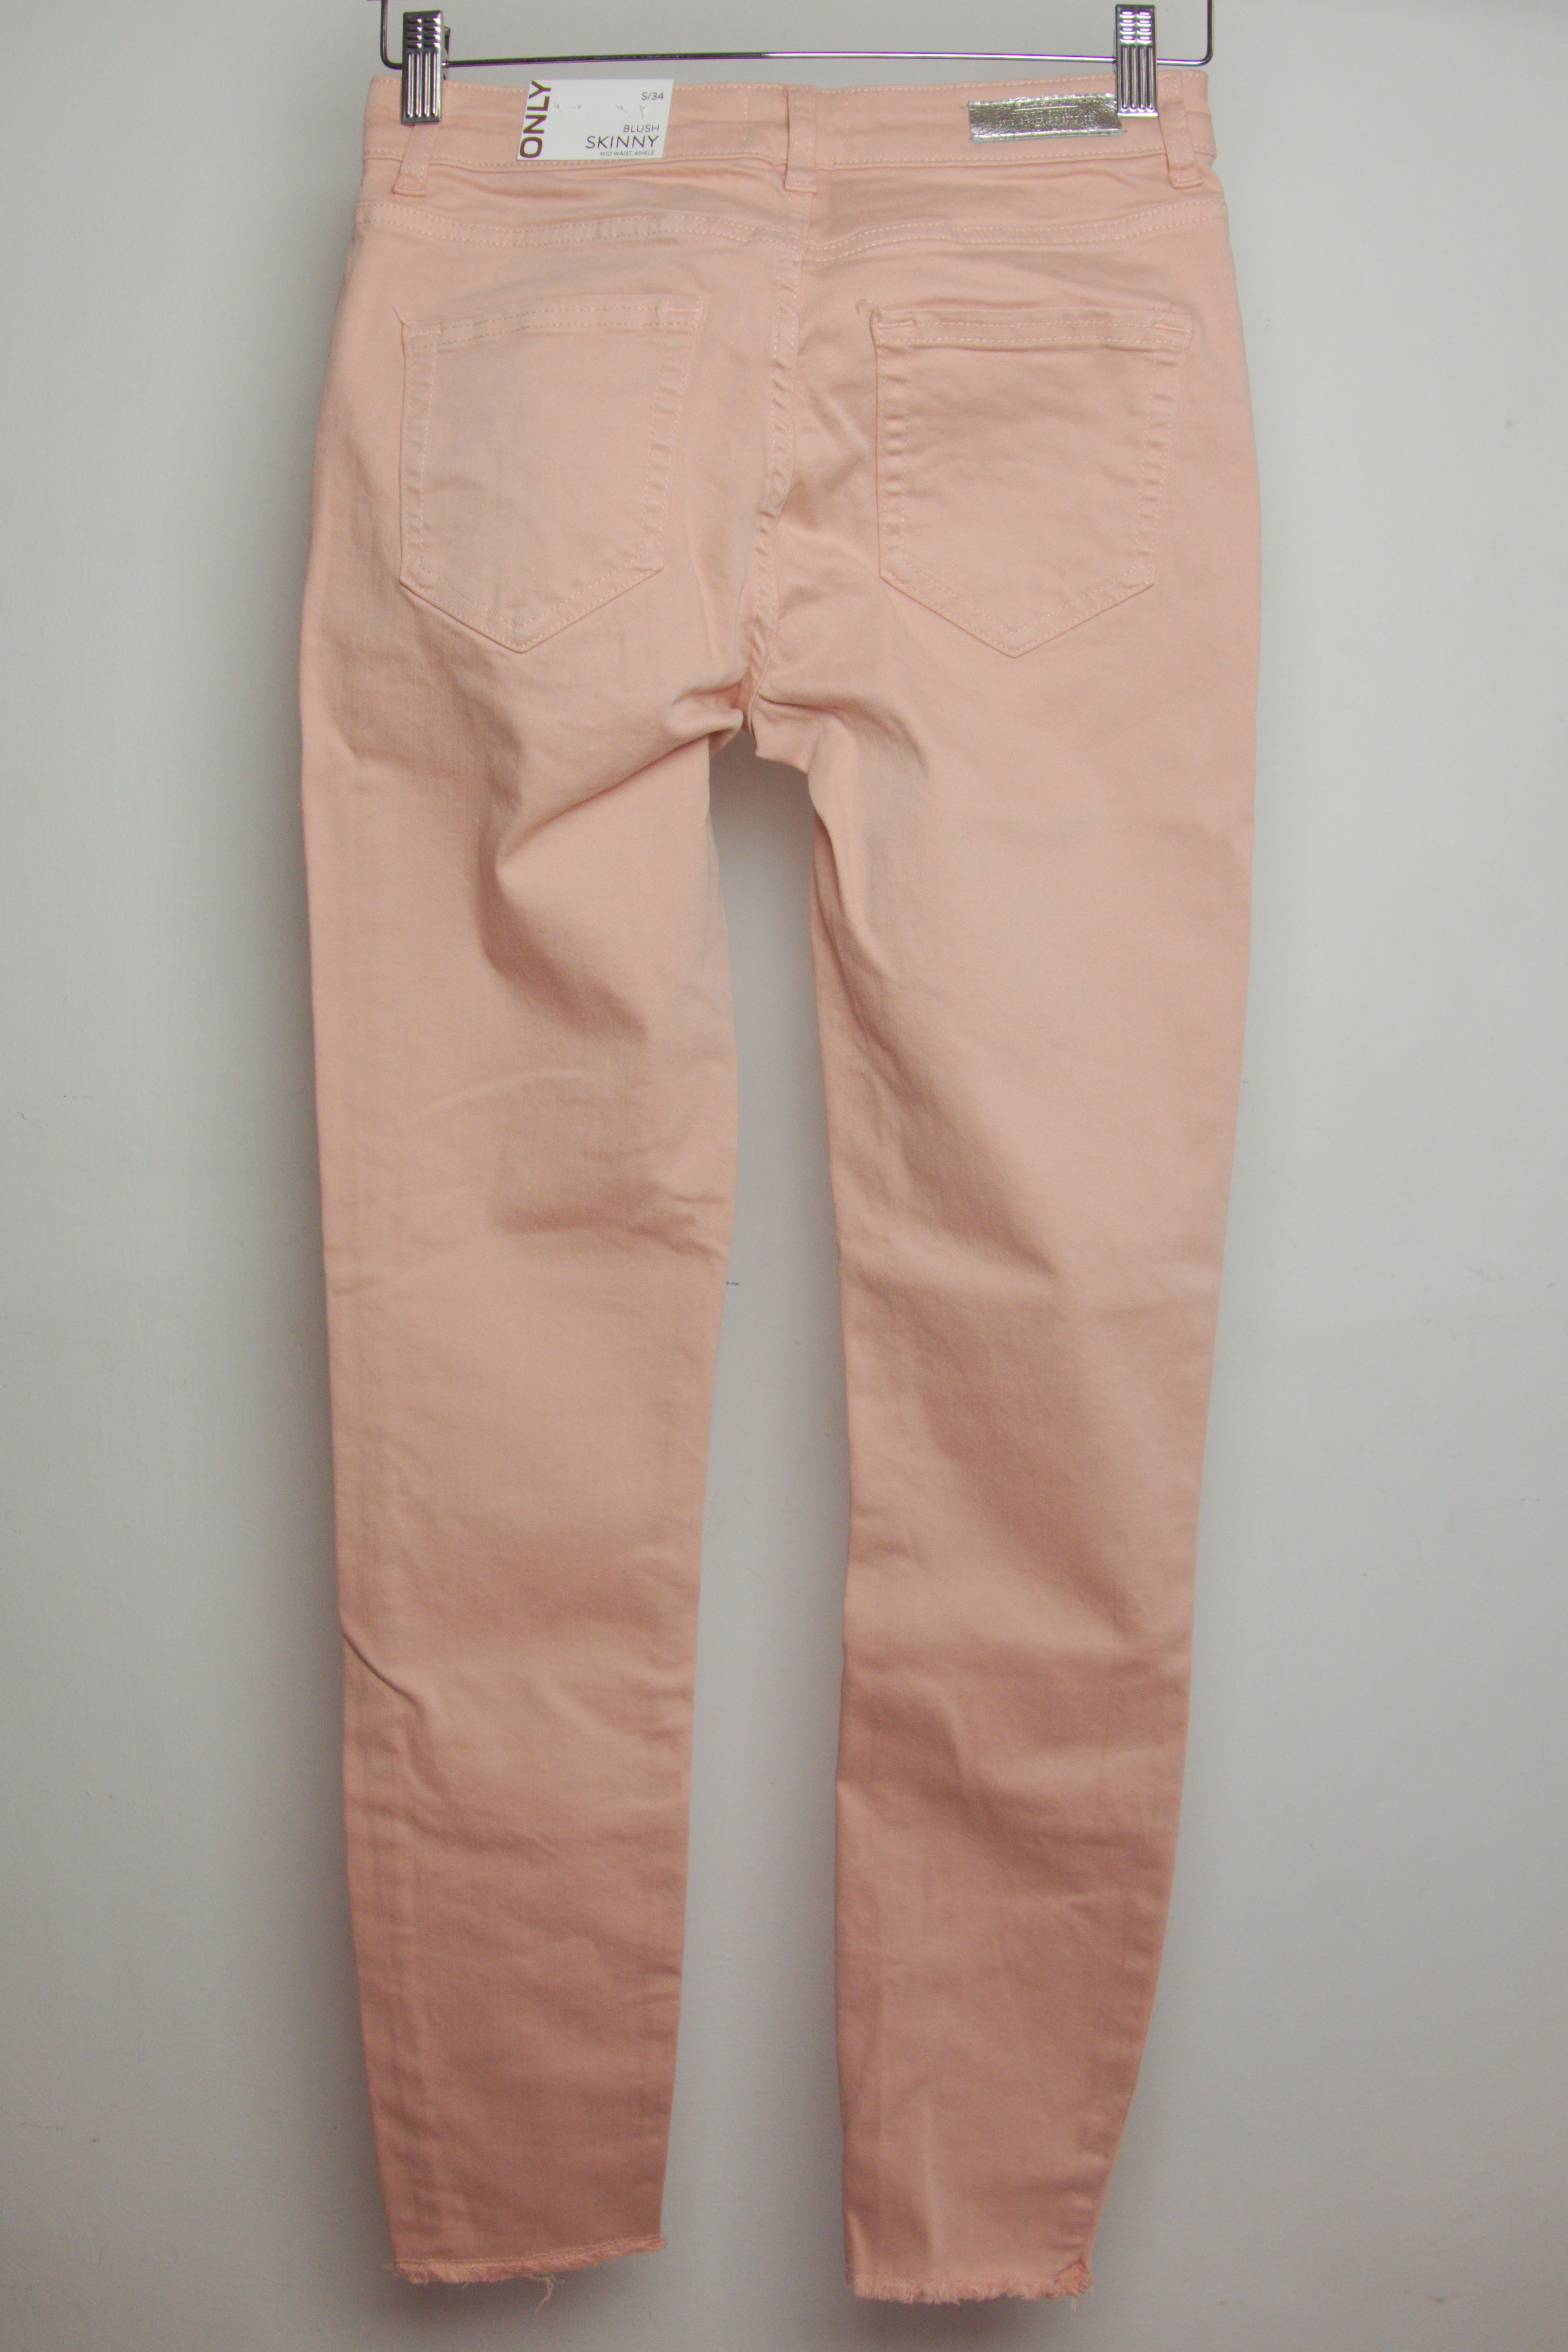 Only - Jeans Blush r. S/34